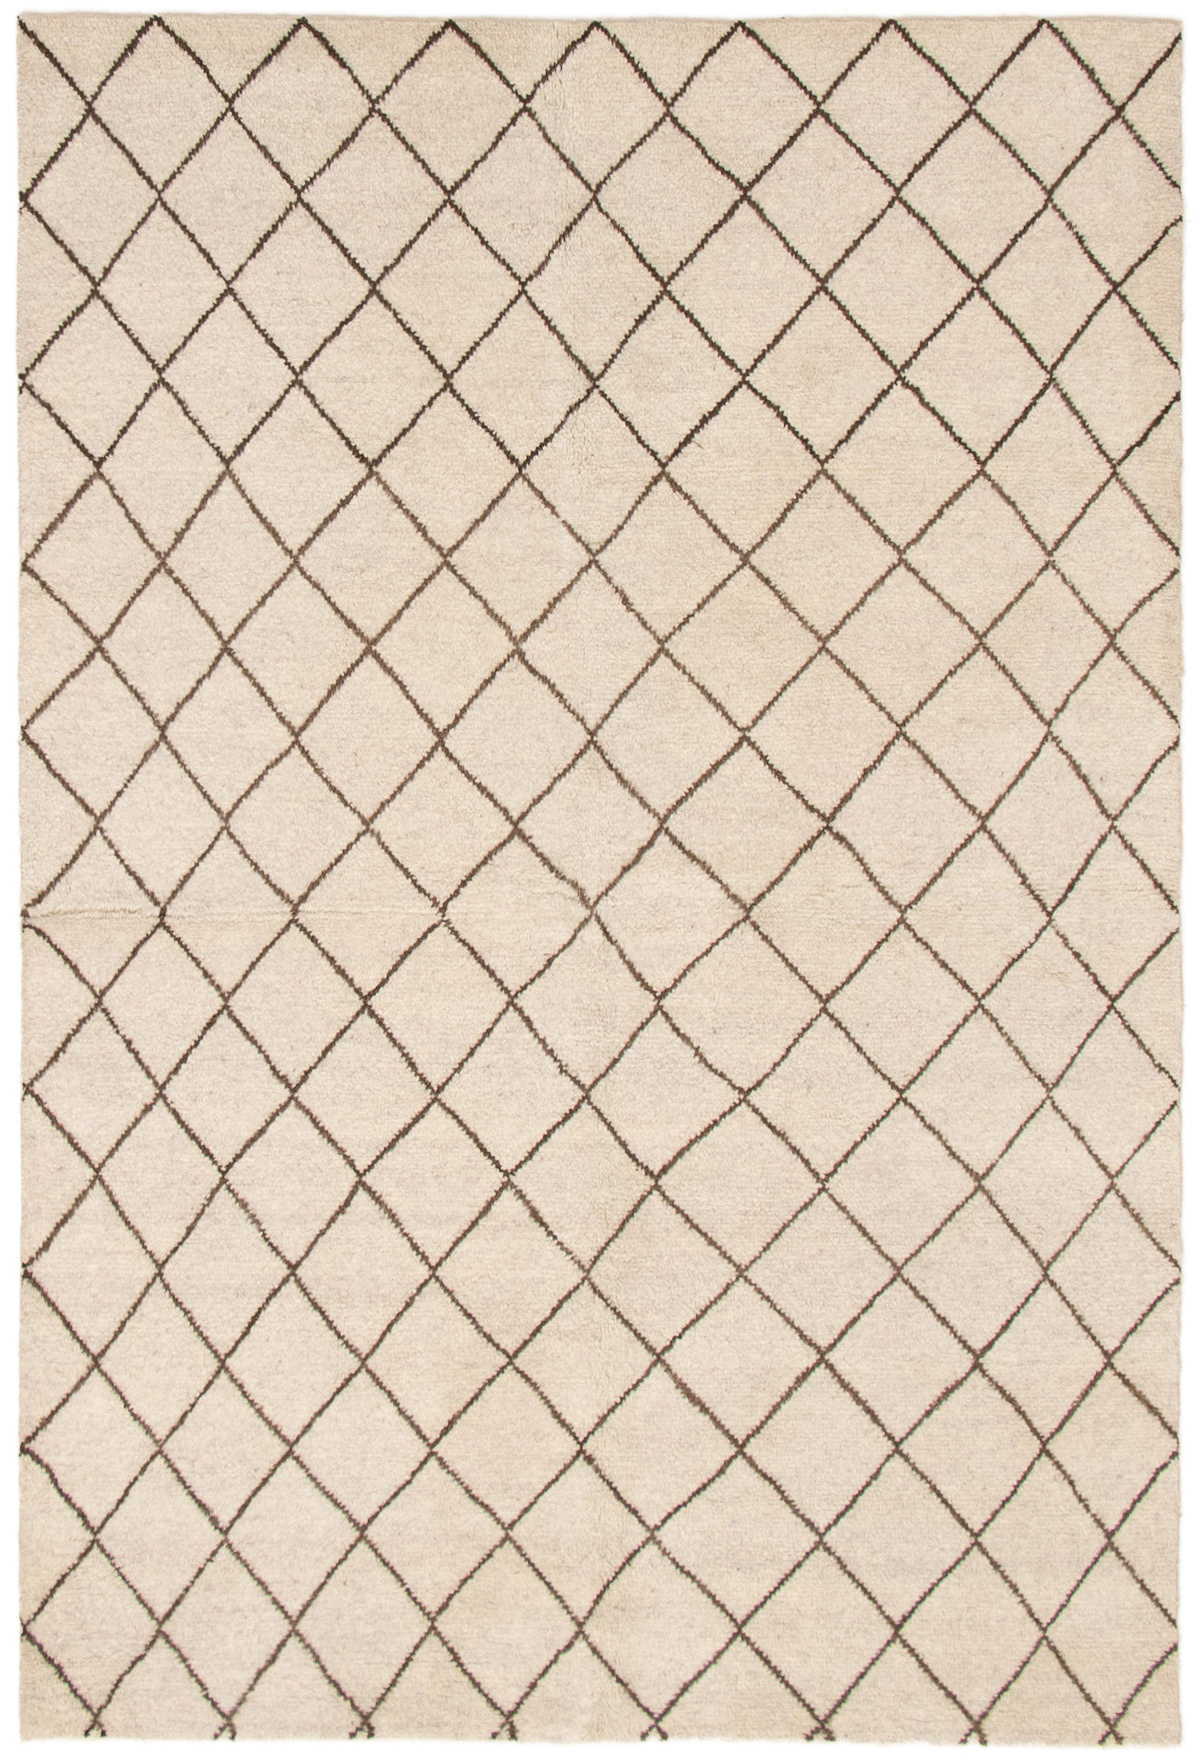 Hand-knotted Arlequin Cream Wool Rug 6'0" x 8'10" Size: 6'0" x 8'10"  